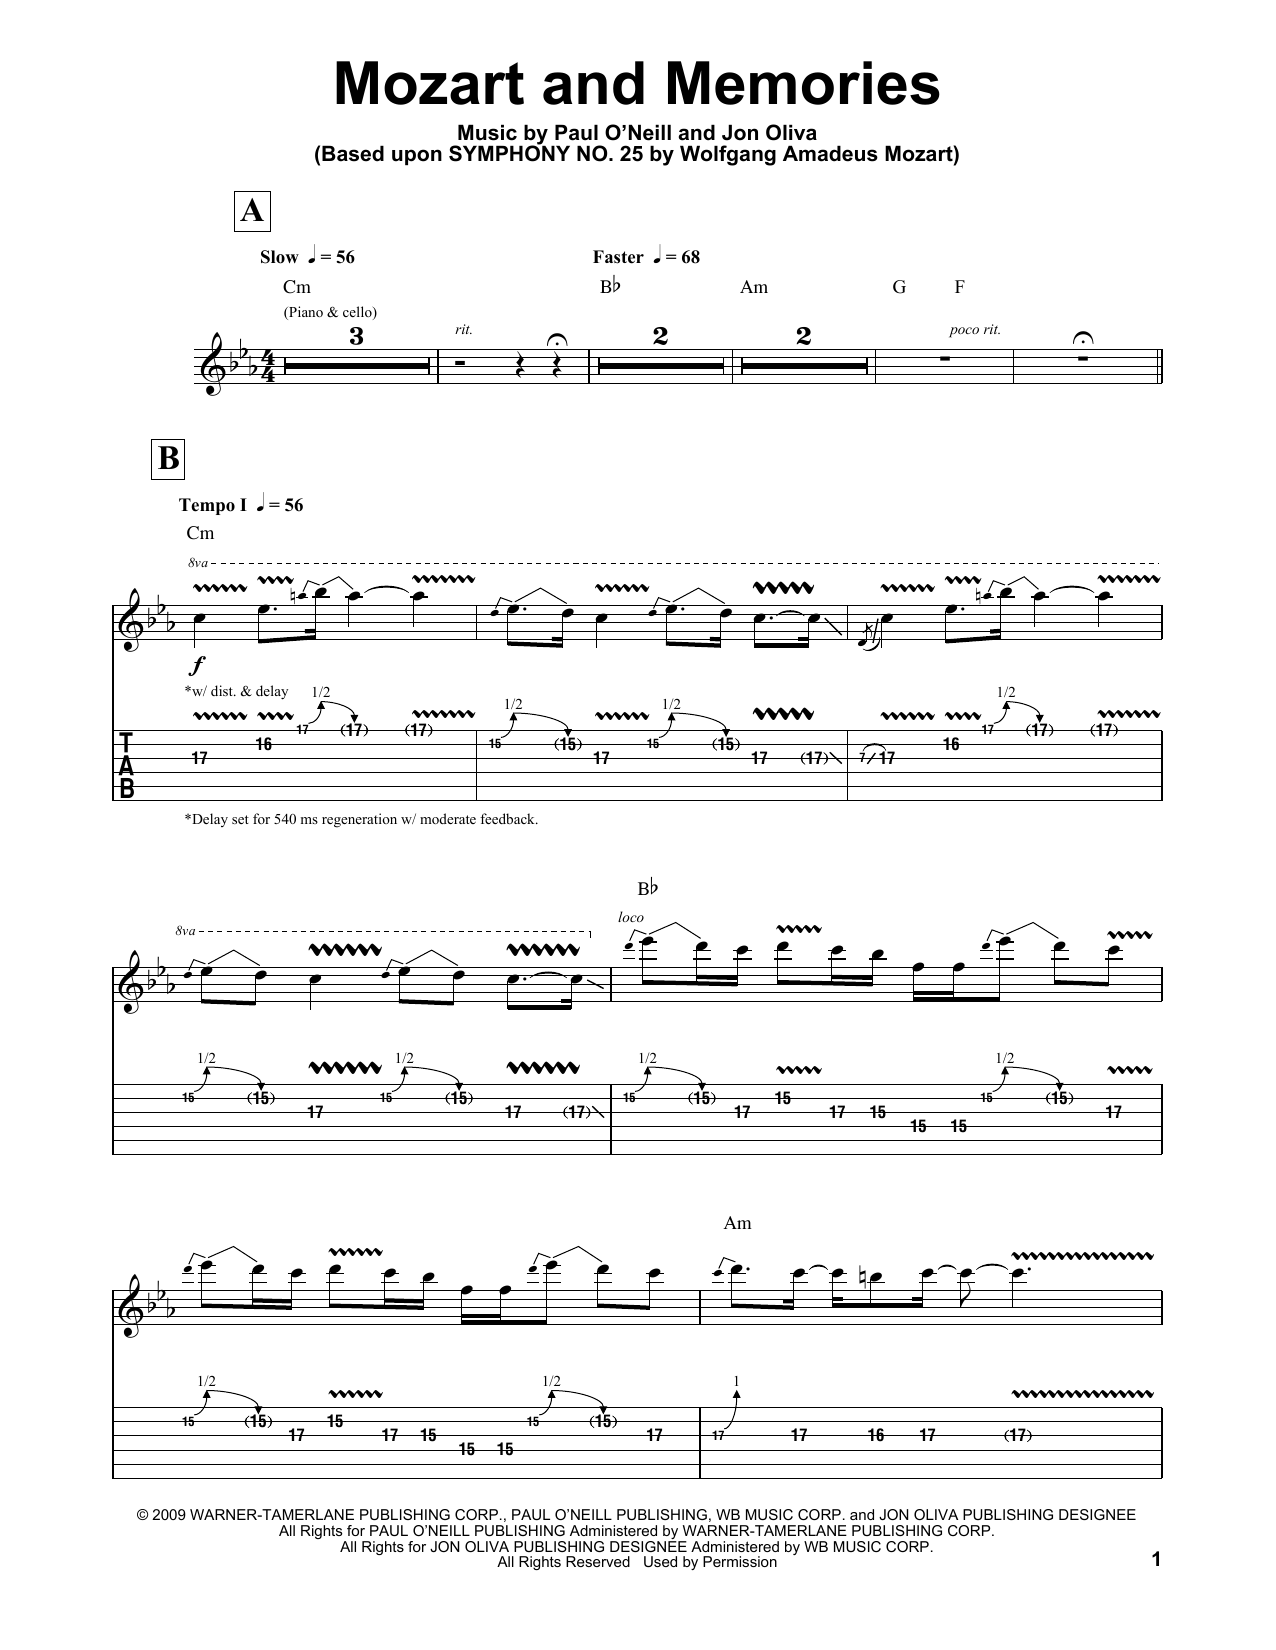 Download Trans-Siberian Orchestra Mozart And Memories Sheet Music